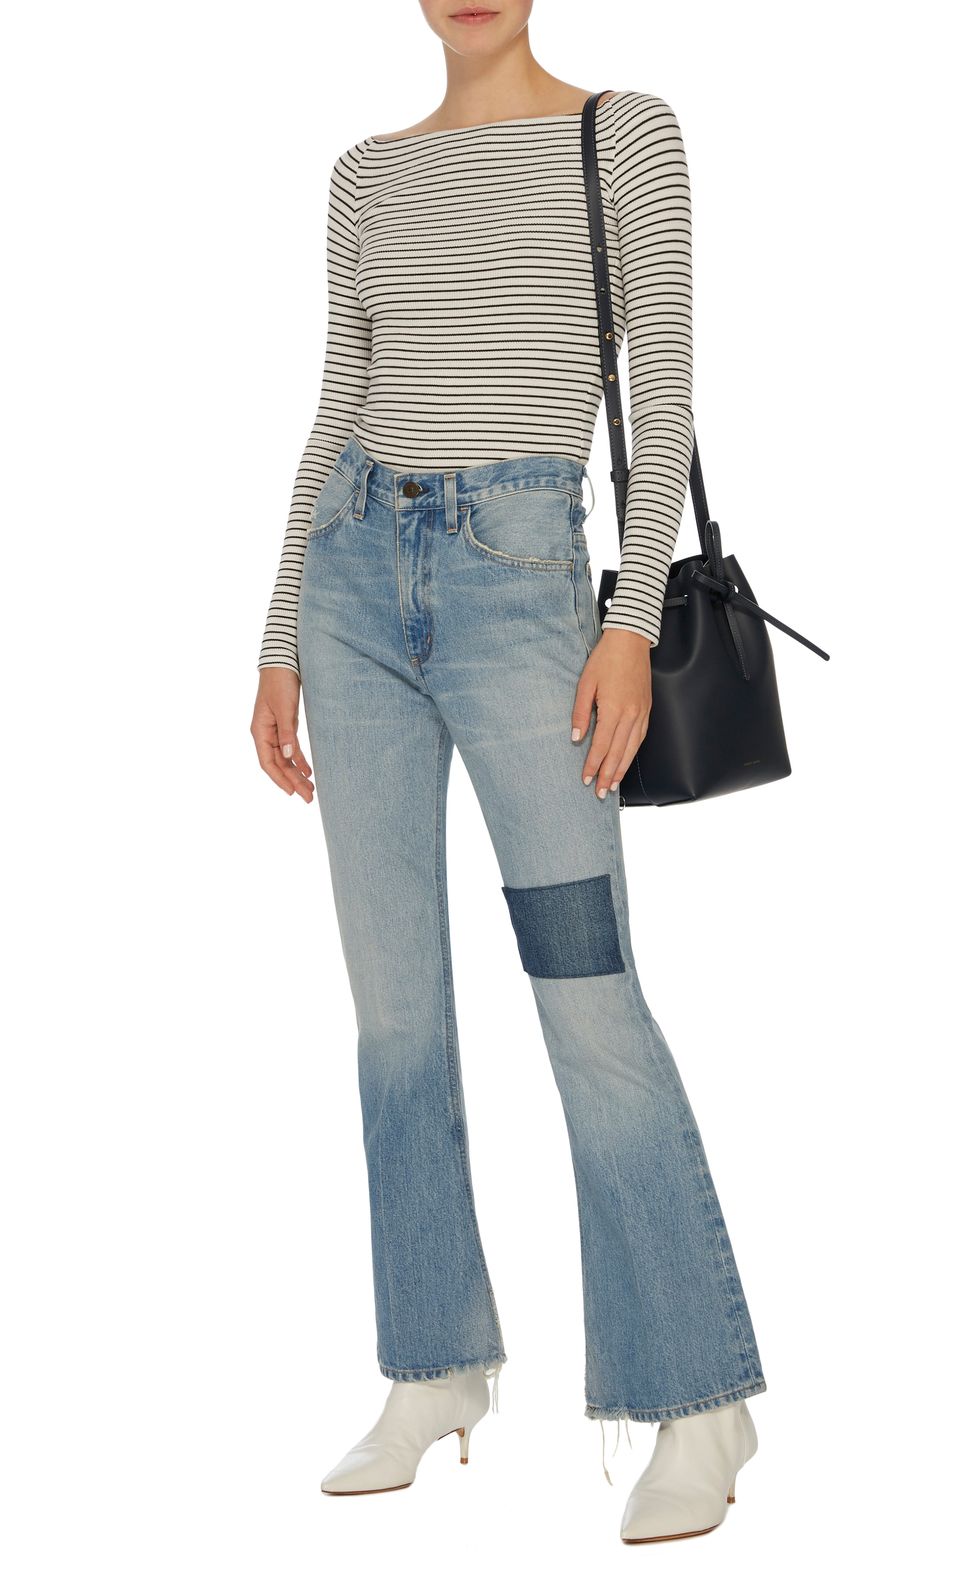 High-Wasted Flare Jeans That Will Fit You Just Right